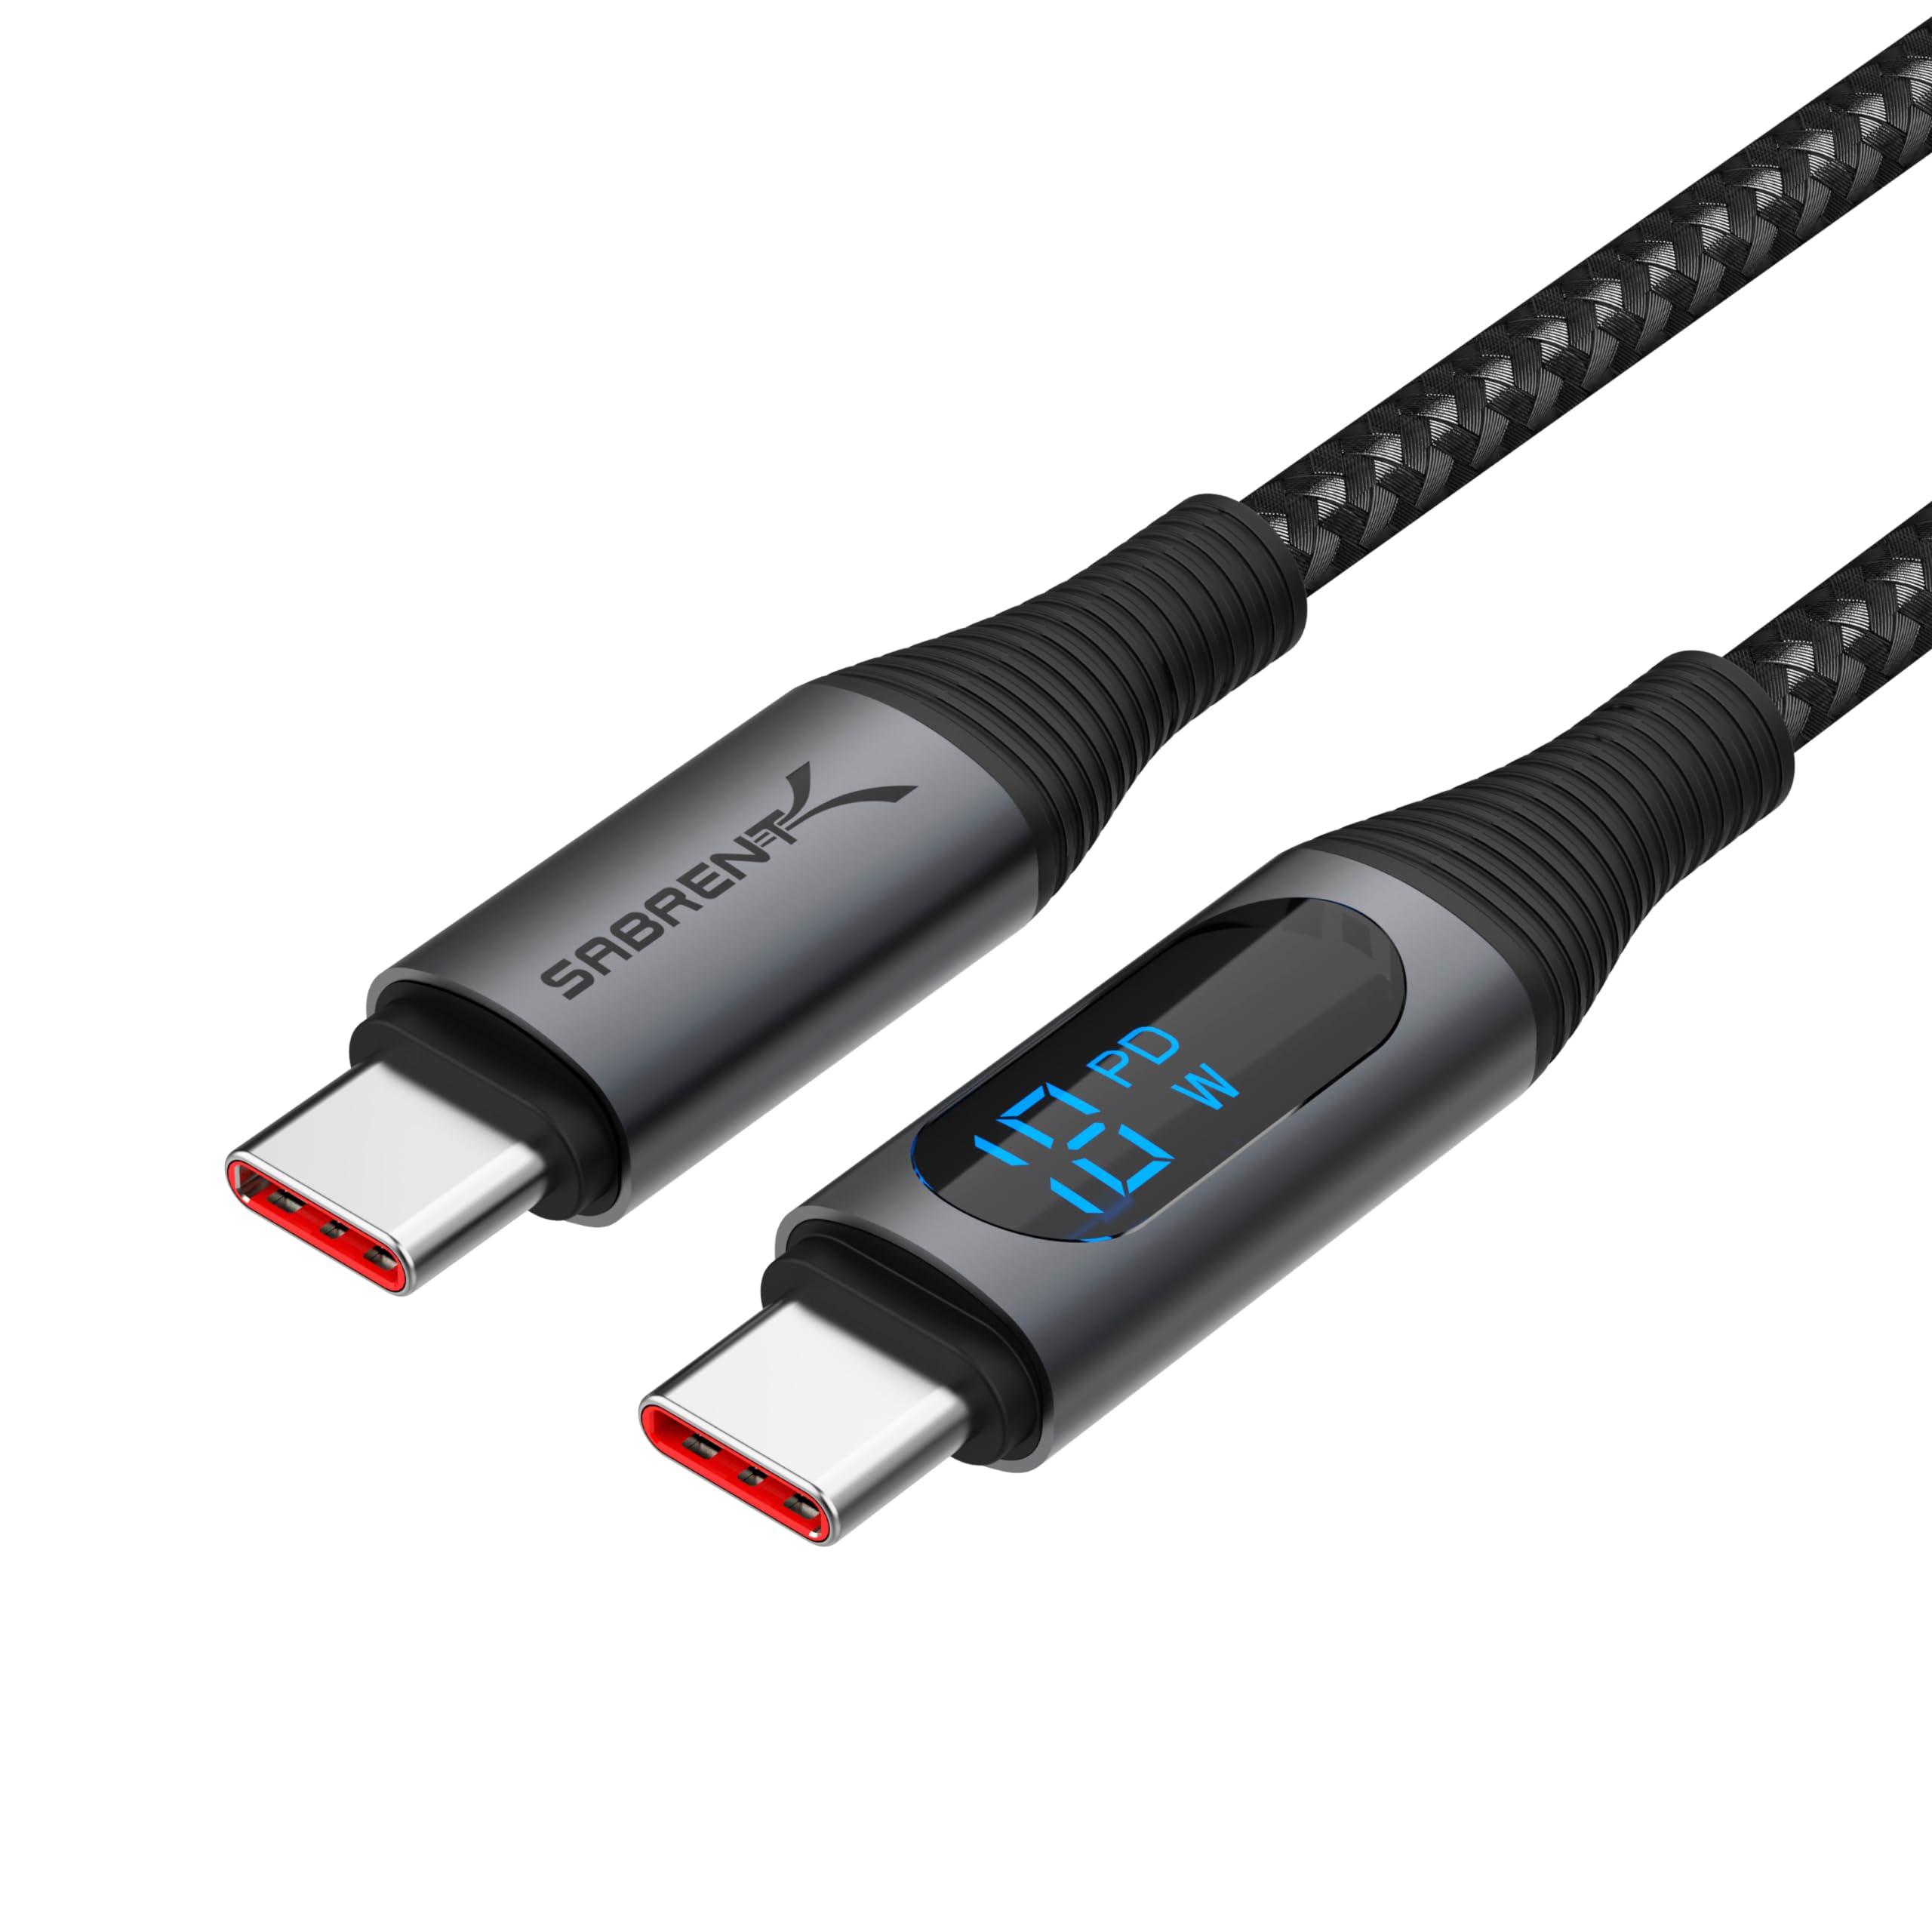 SABRENT USB C to USB C Charging Cable with Smart Display, 1M/3.3FT Long, E-Marker Chip, 100W Charging and 480Mbps Data Transfer Speeds, for Laptops, Smartphones, Tablets (CB-C2C1)